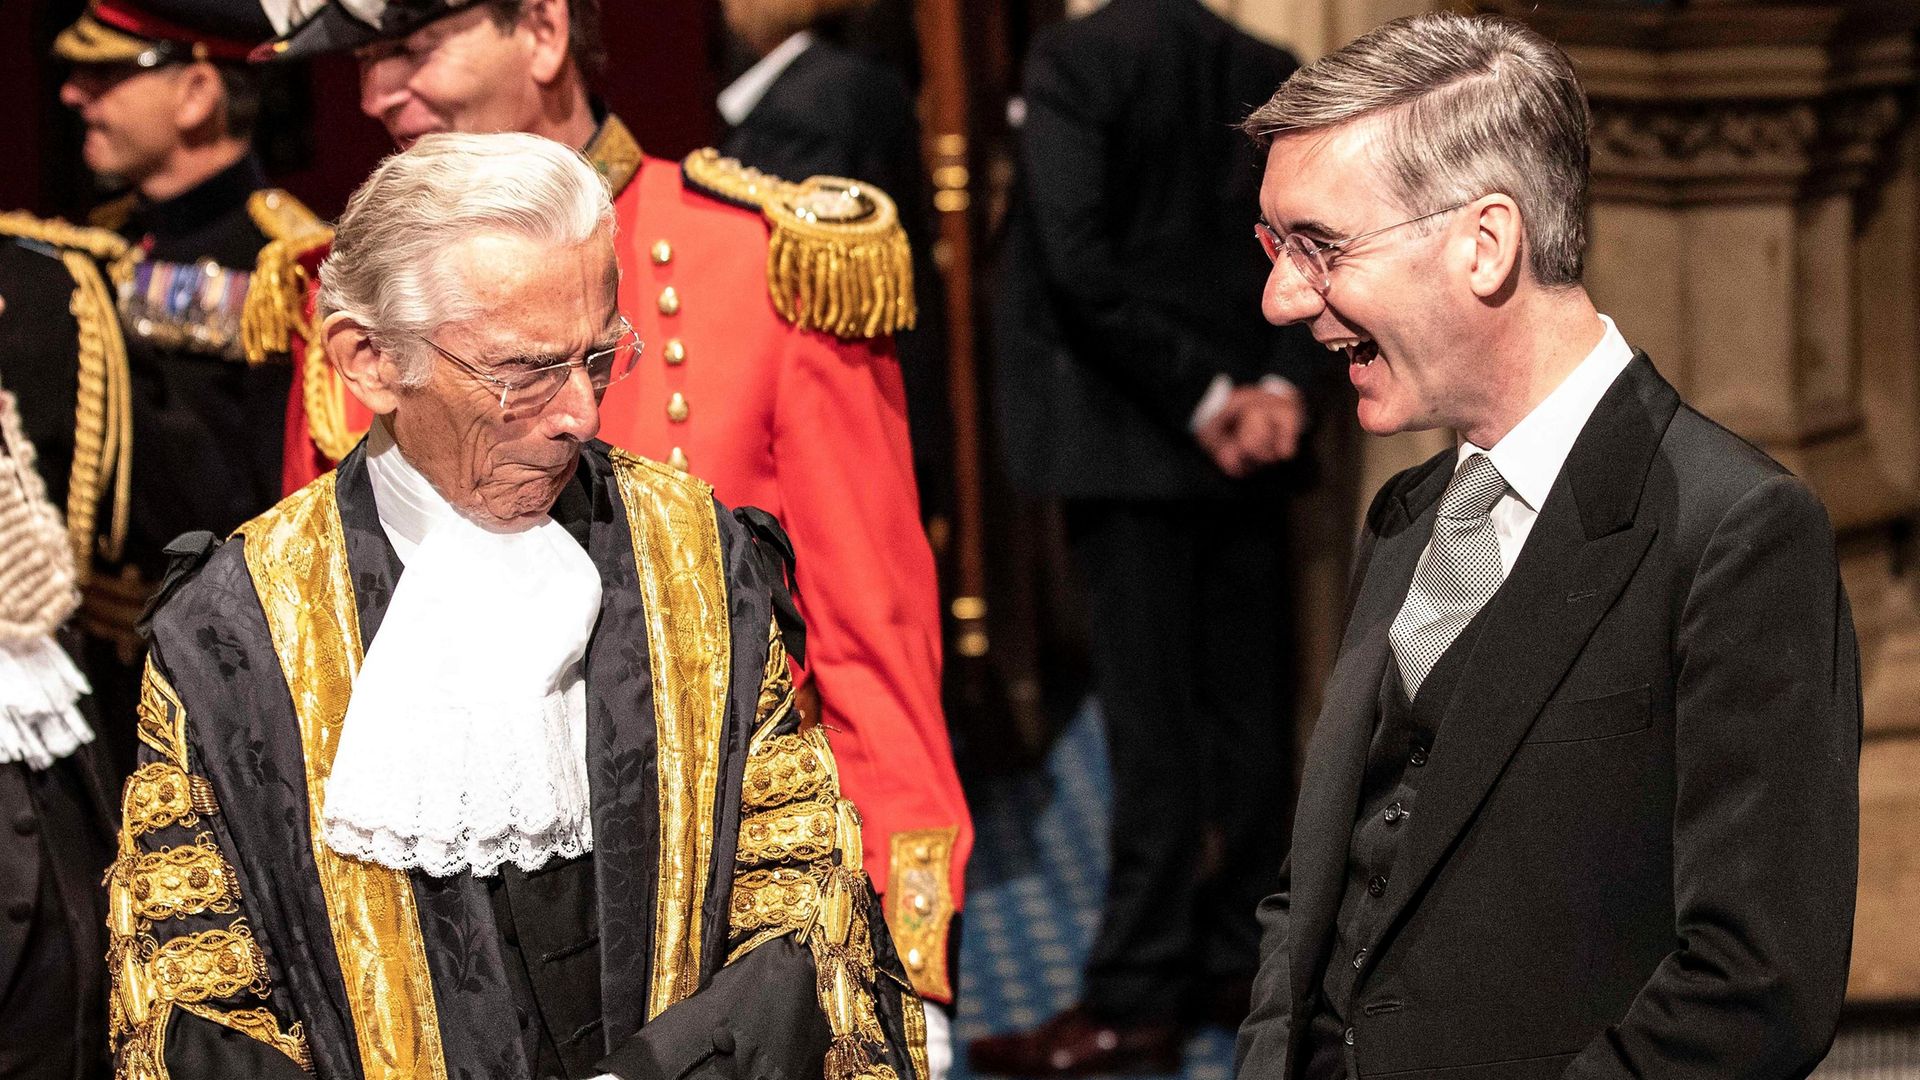 Jacob Rees-Mogg shares a joke with former speaker of the House of Lords Norman Fowler